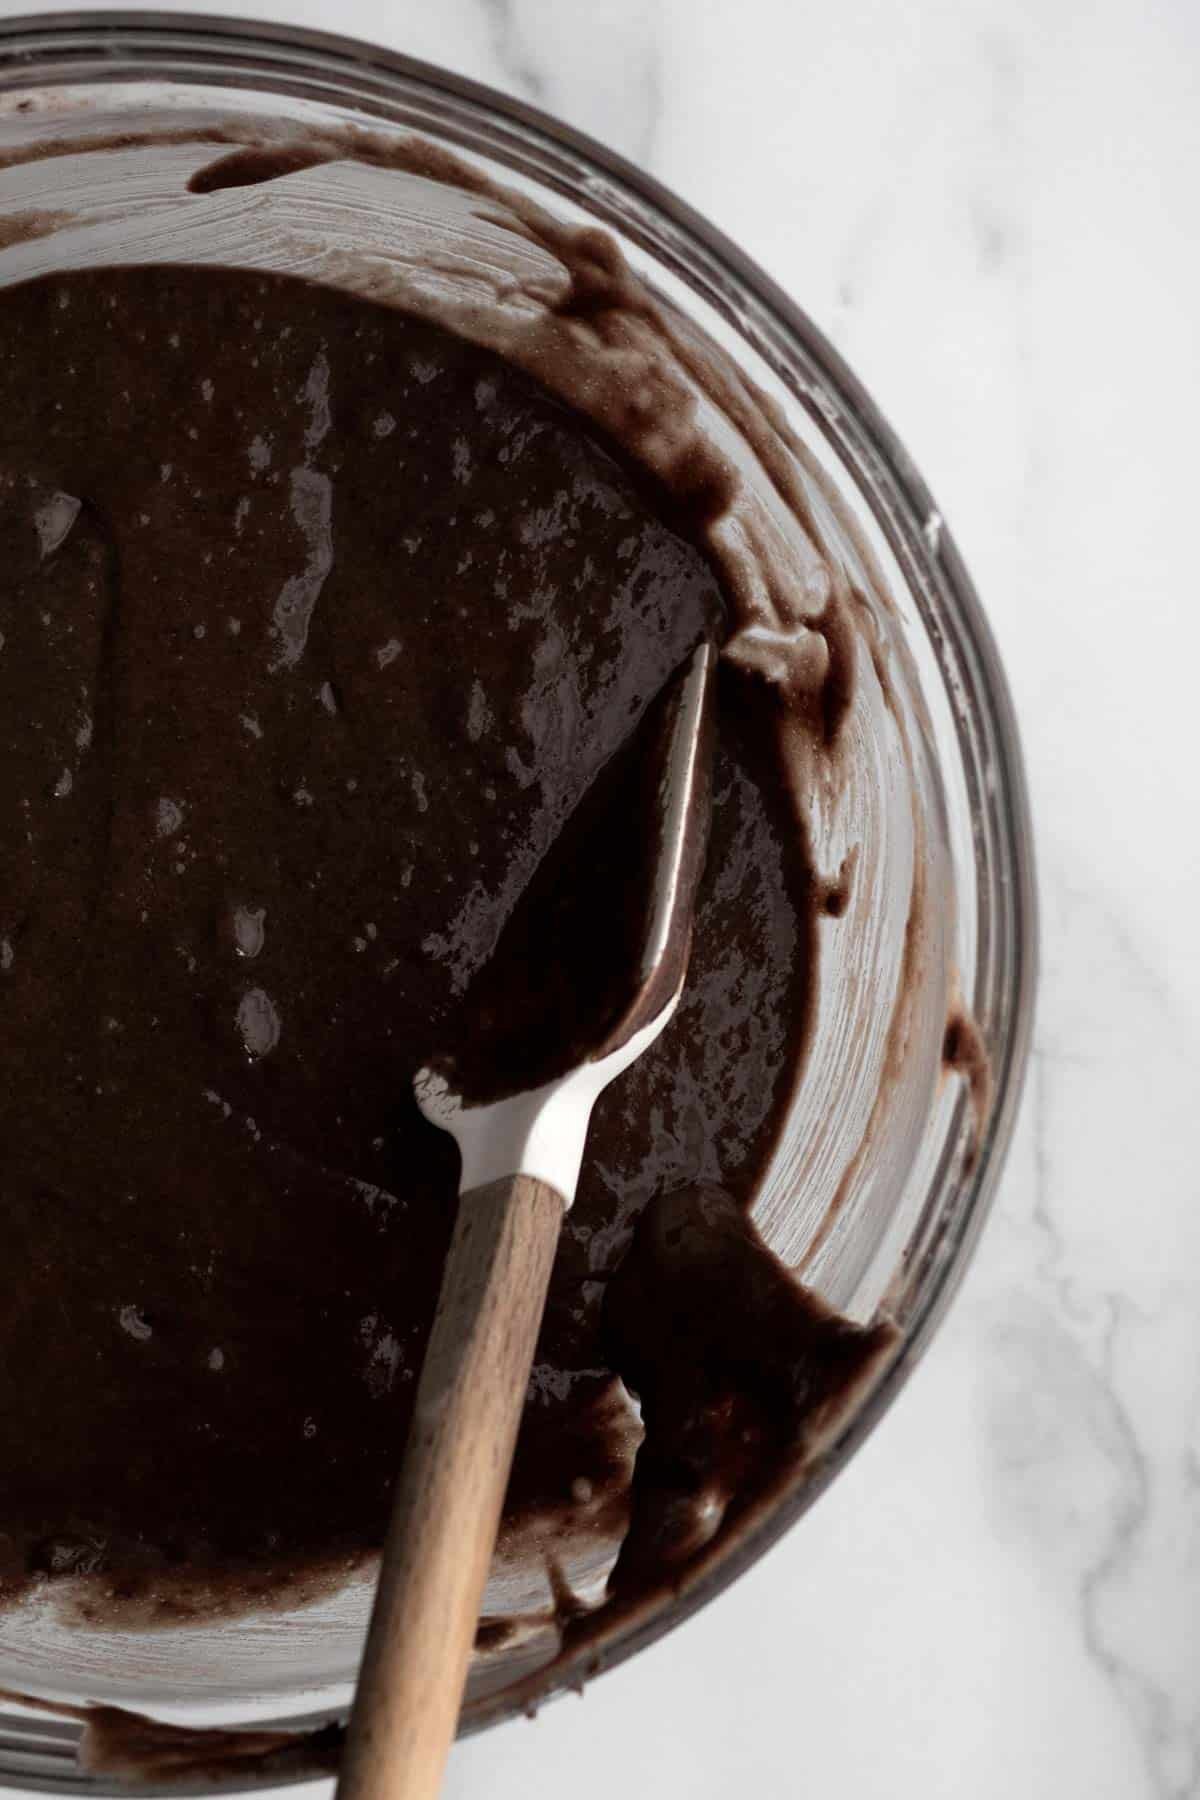 Mixing the wet and dry ingredients into a chocolatey donut batter.